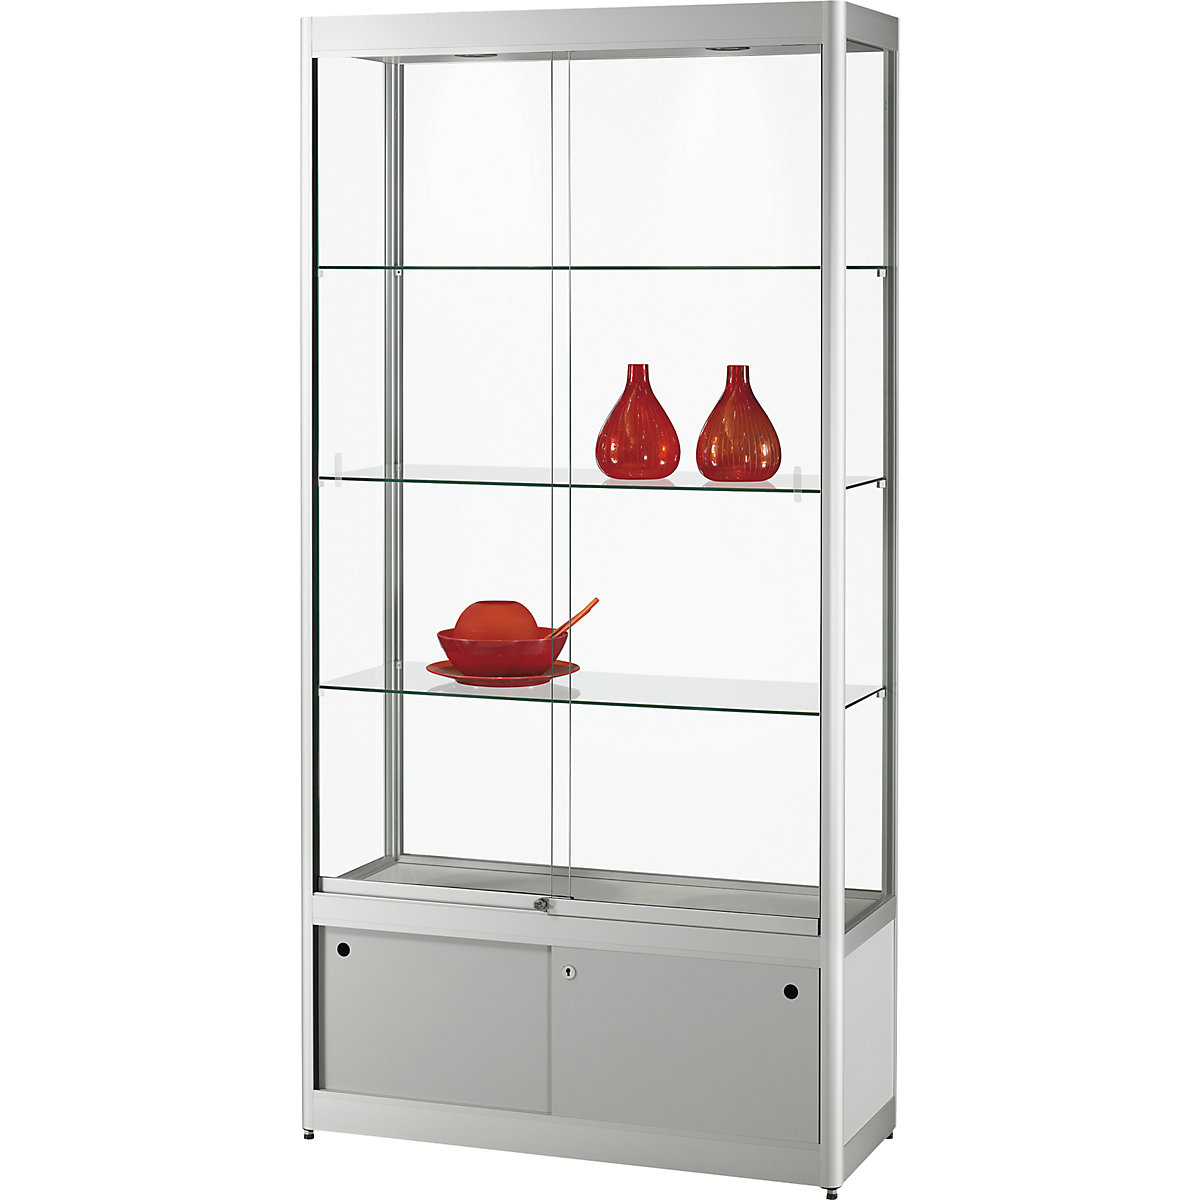 Glass cabinet, WxDxH 1000 x 400 x 2000 mm, LED lighting, lamp head Ø 50 mm, with base cupboard-3